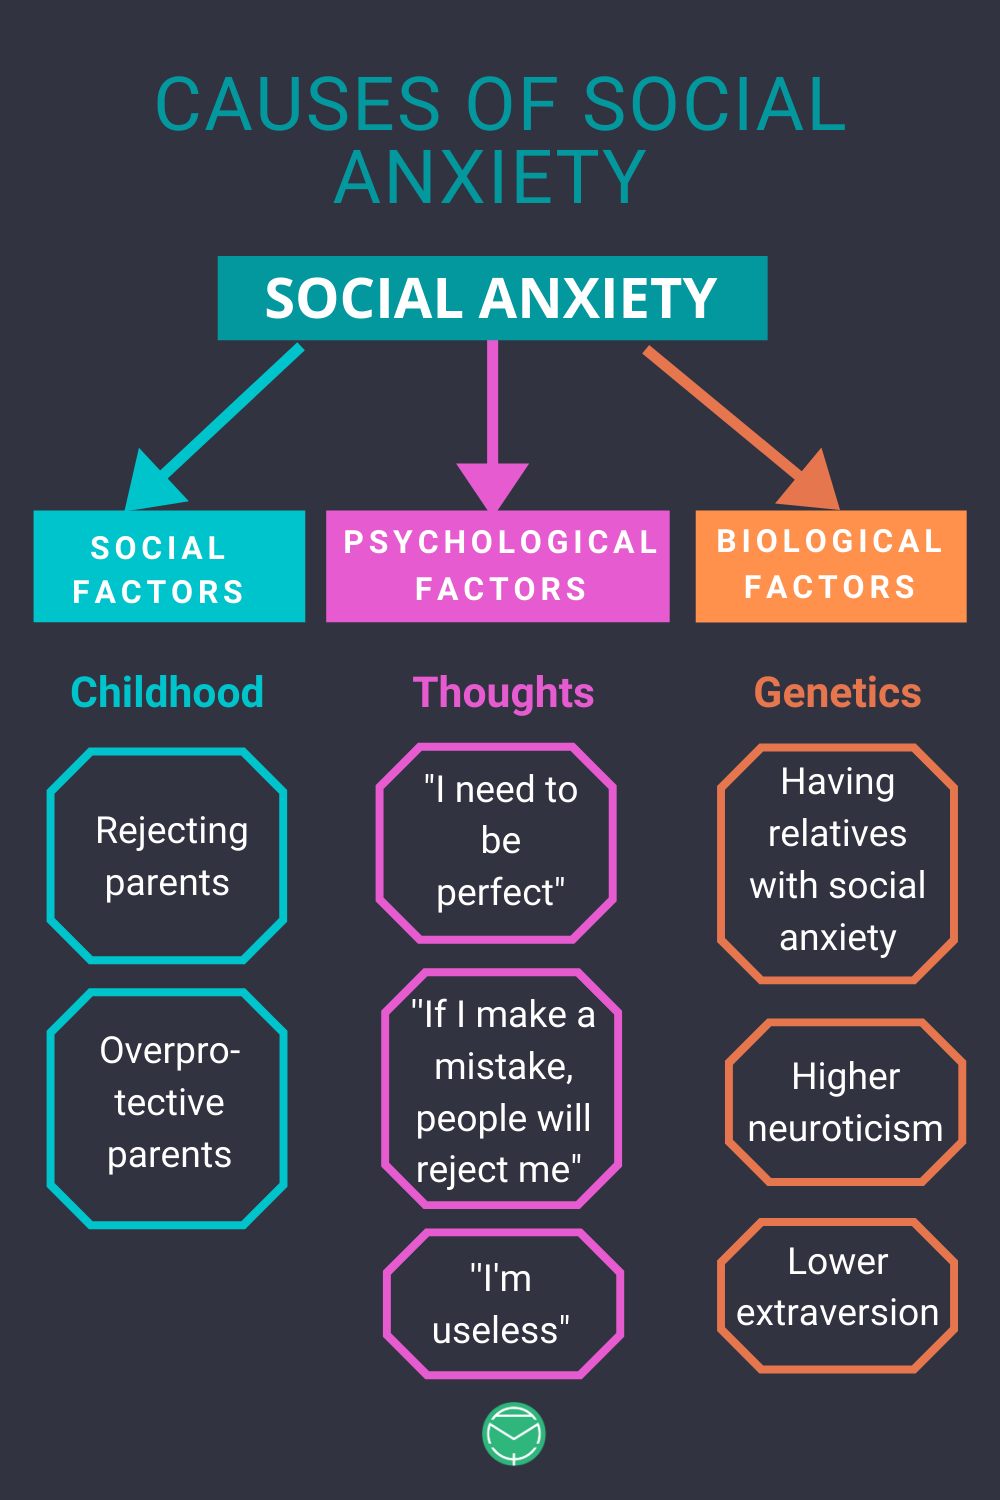 How to understand social anxiety